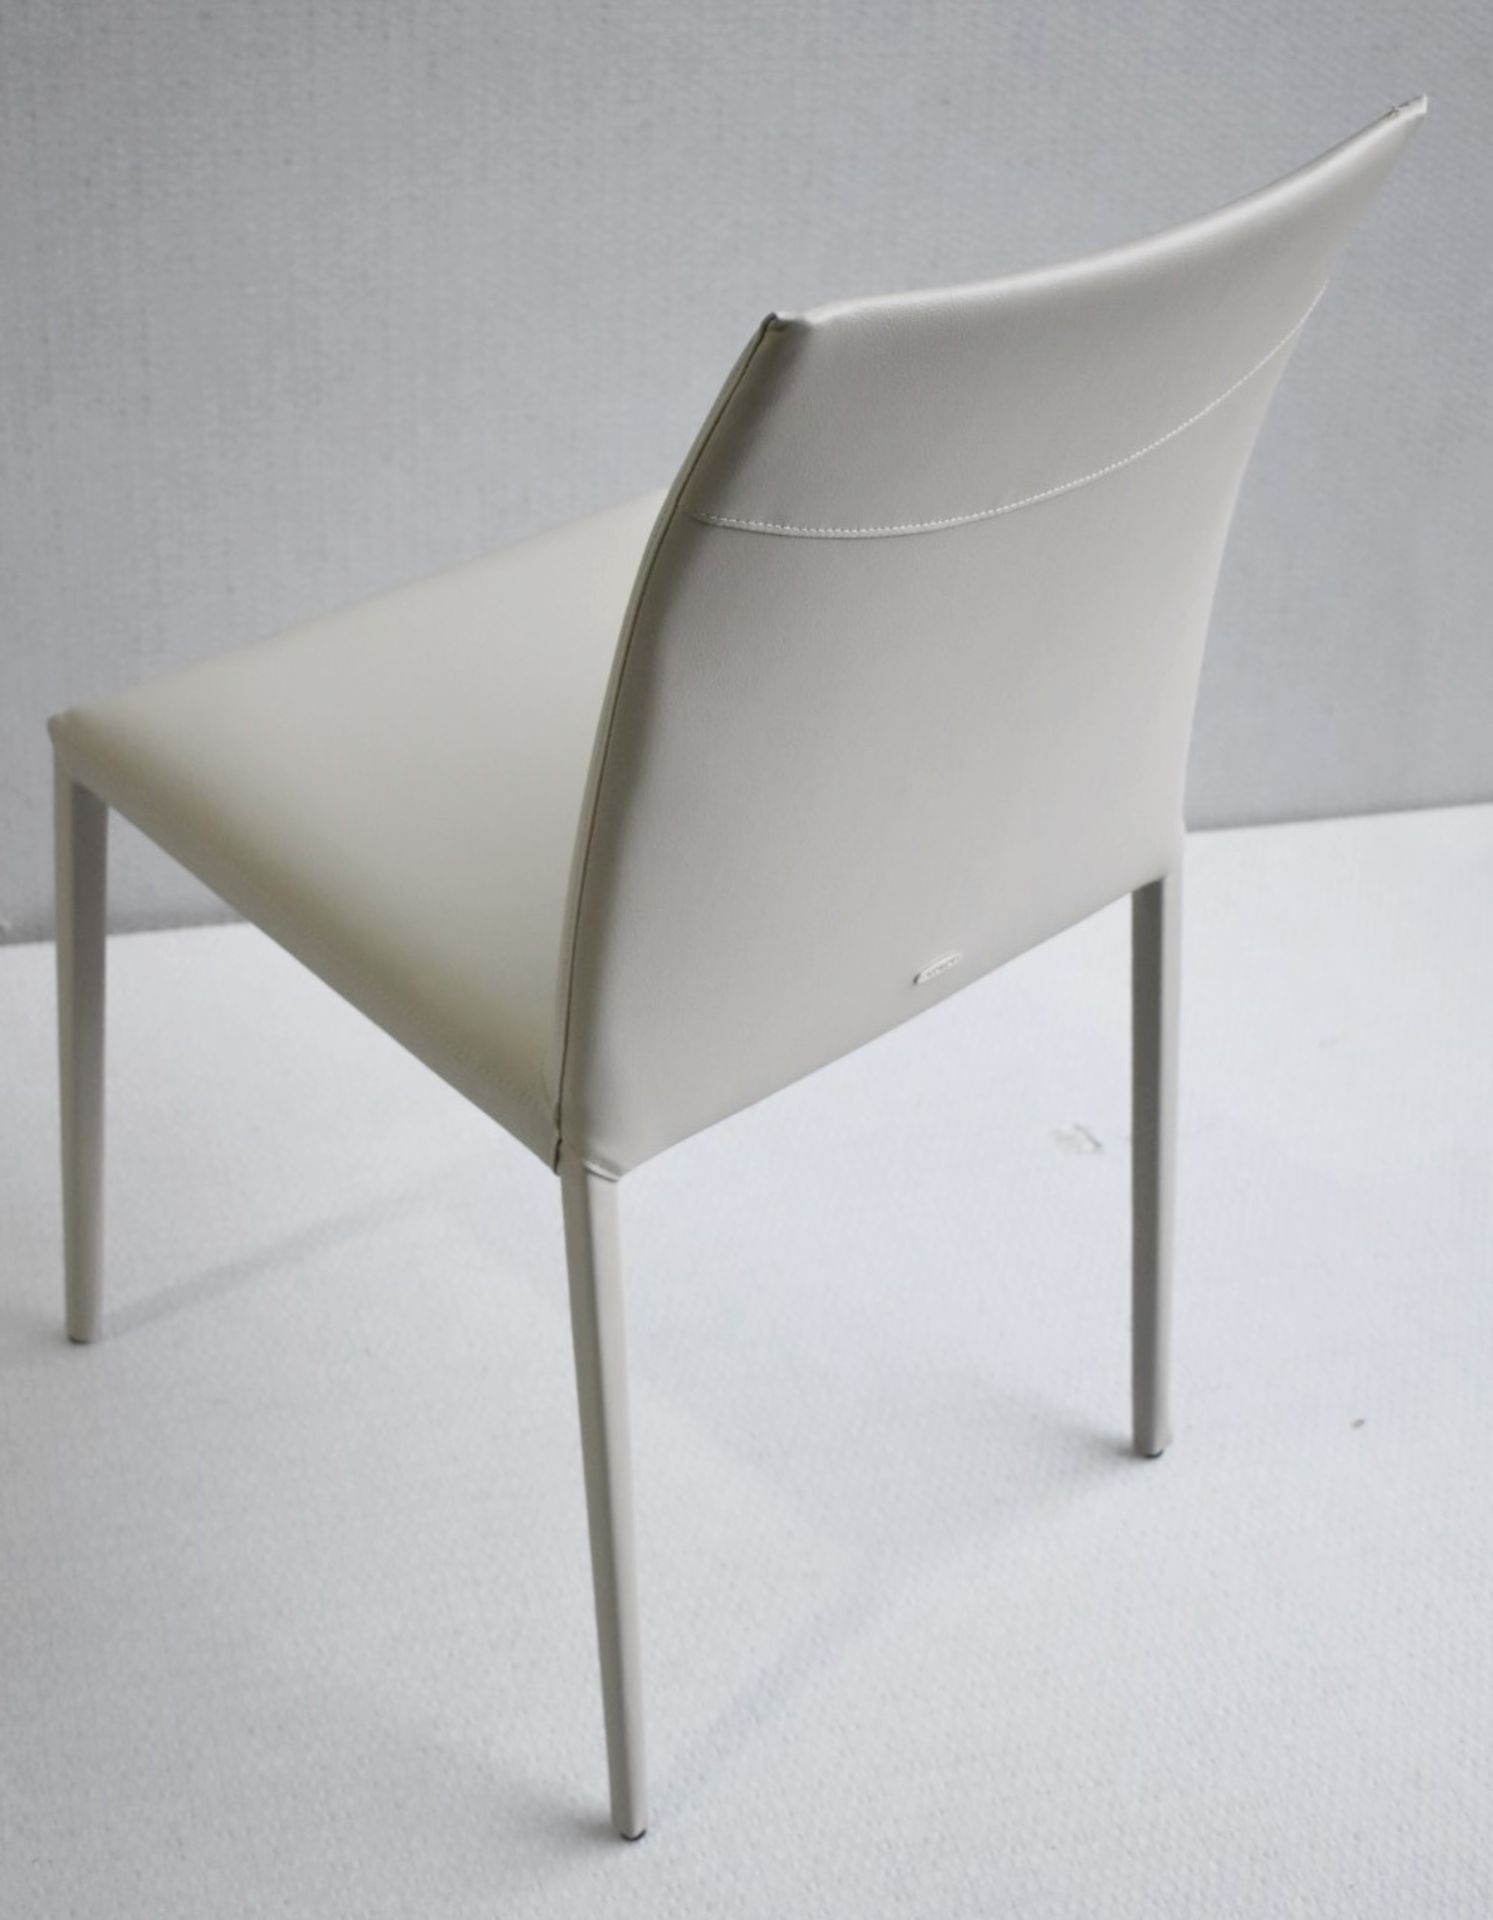 1 x CATTELAN ITALIA 'Norma' Designer Fully Upholstered Chair in a Pale Premium Leather - Image 5 of 9